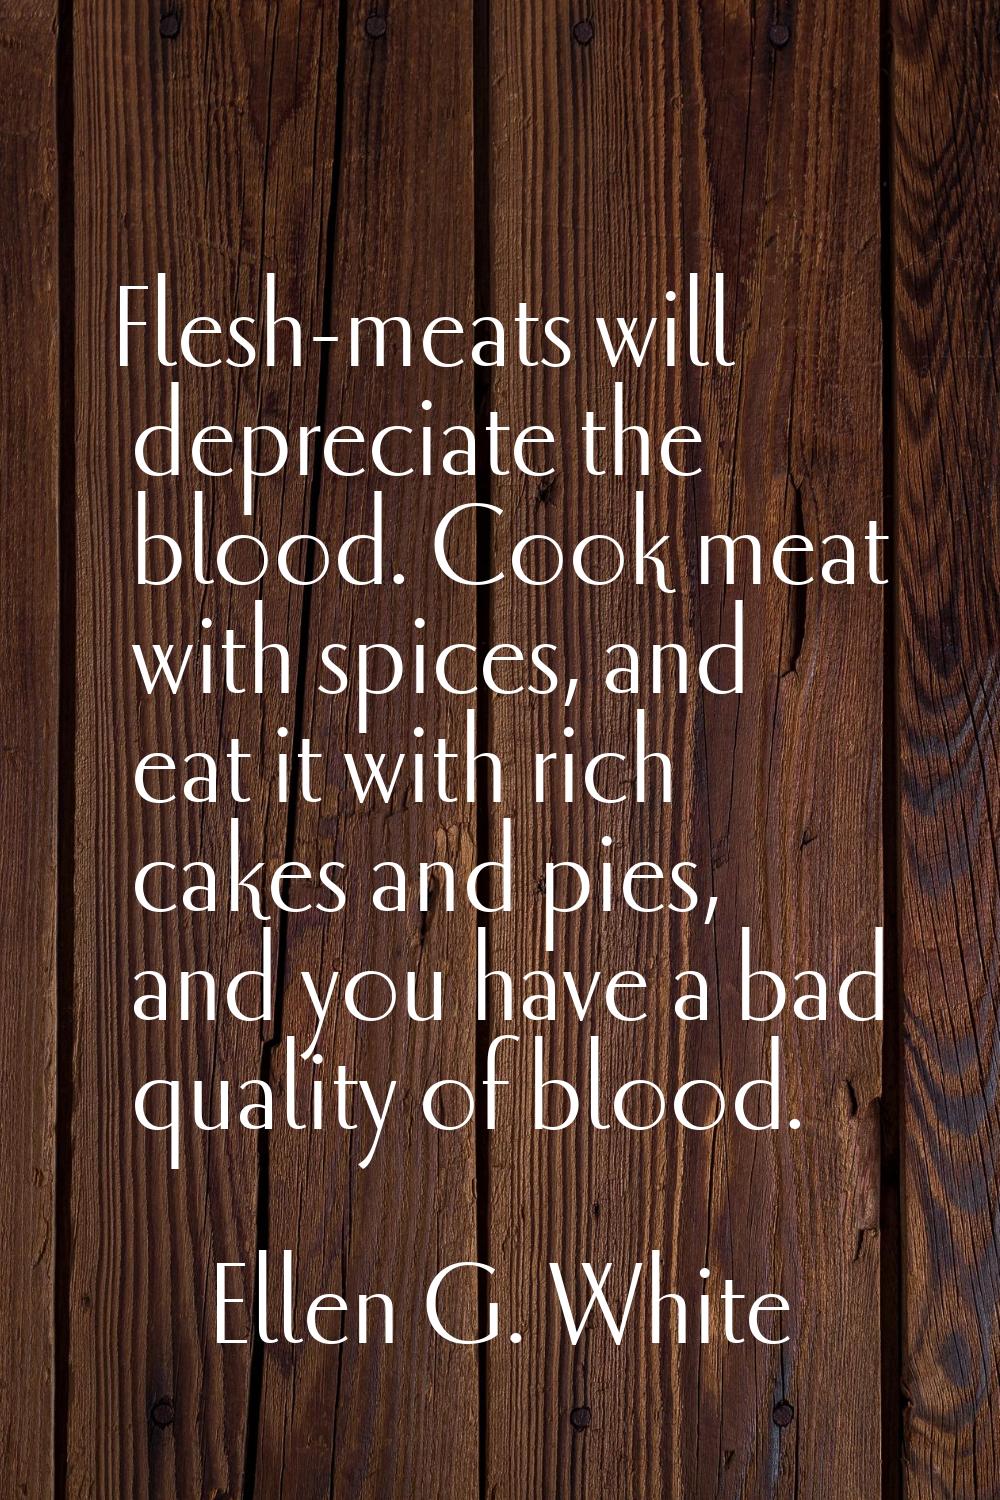 Flesh-meats will depreciate the blood. Cook meat with spices, and eat it with rich cakes and pies, 